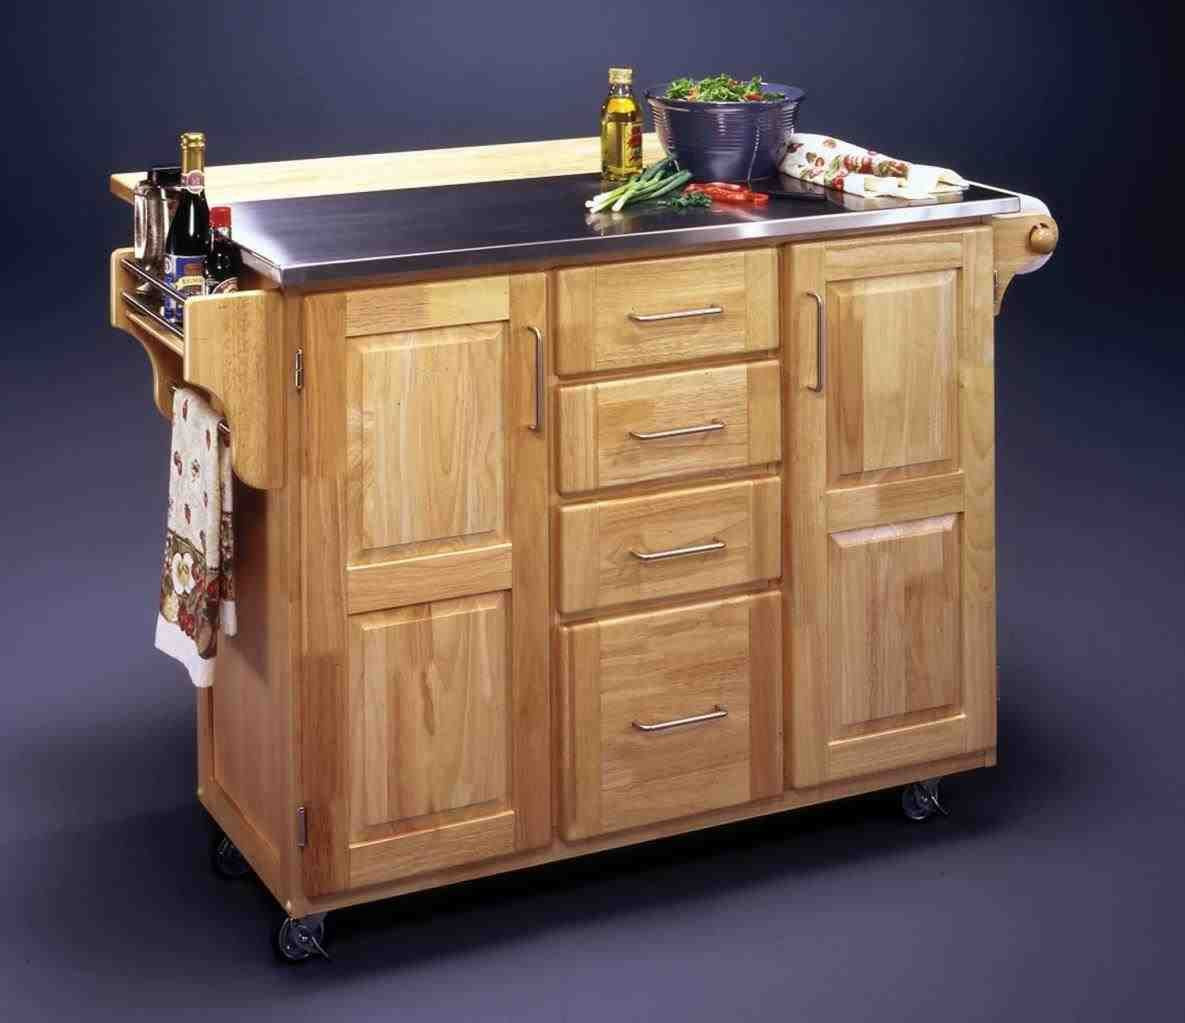 Rustic Kitchen Island On Wheels Best Of New Post Rustic Kitchen Island On Wheels Of Rustic Kitchen Island On Wheels 